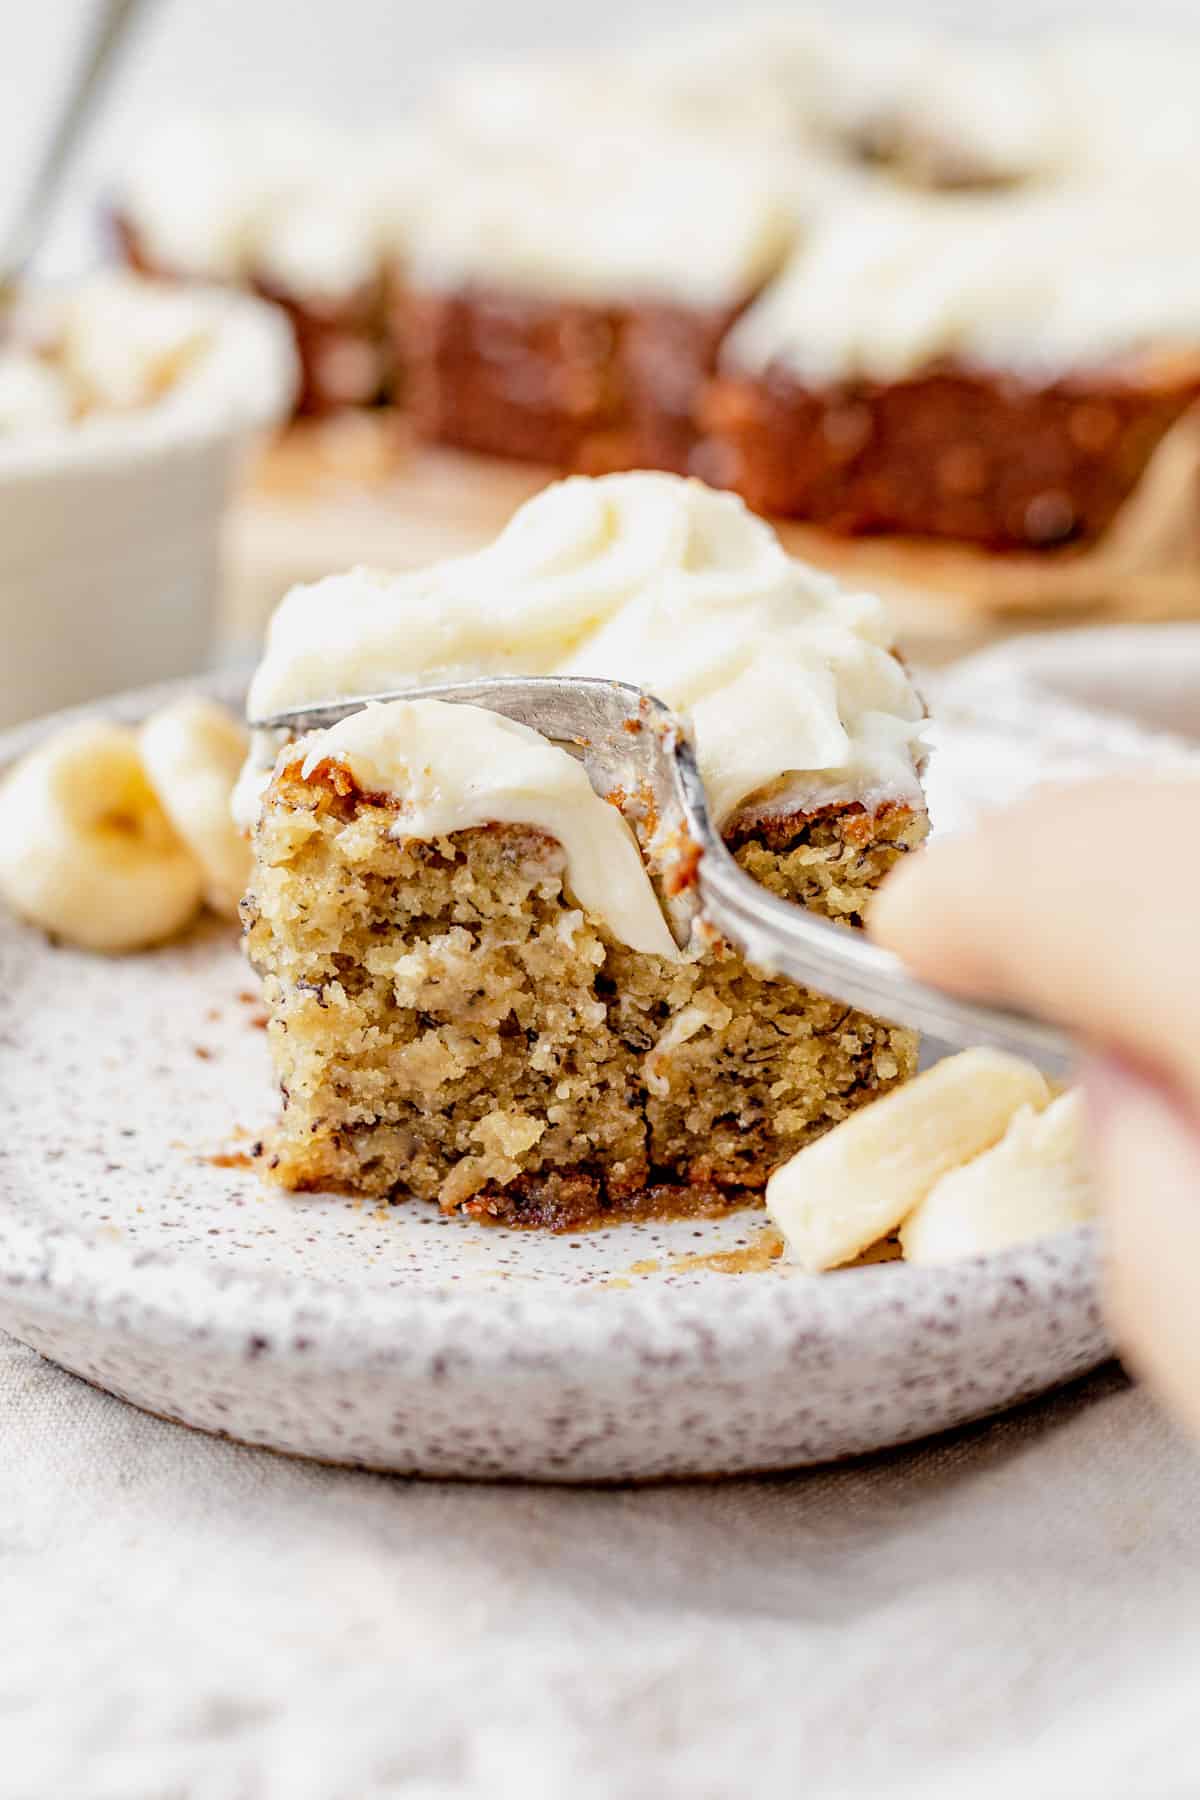 a fork cutting into a piece of banana cake with cream cheese frosting